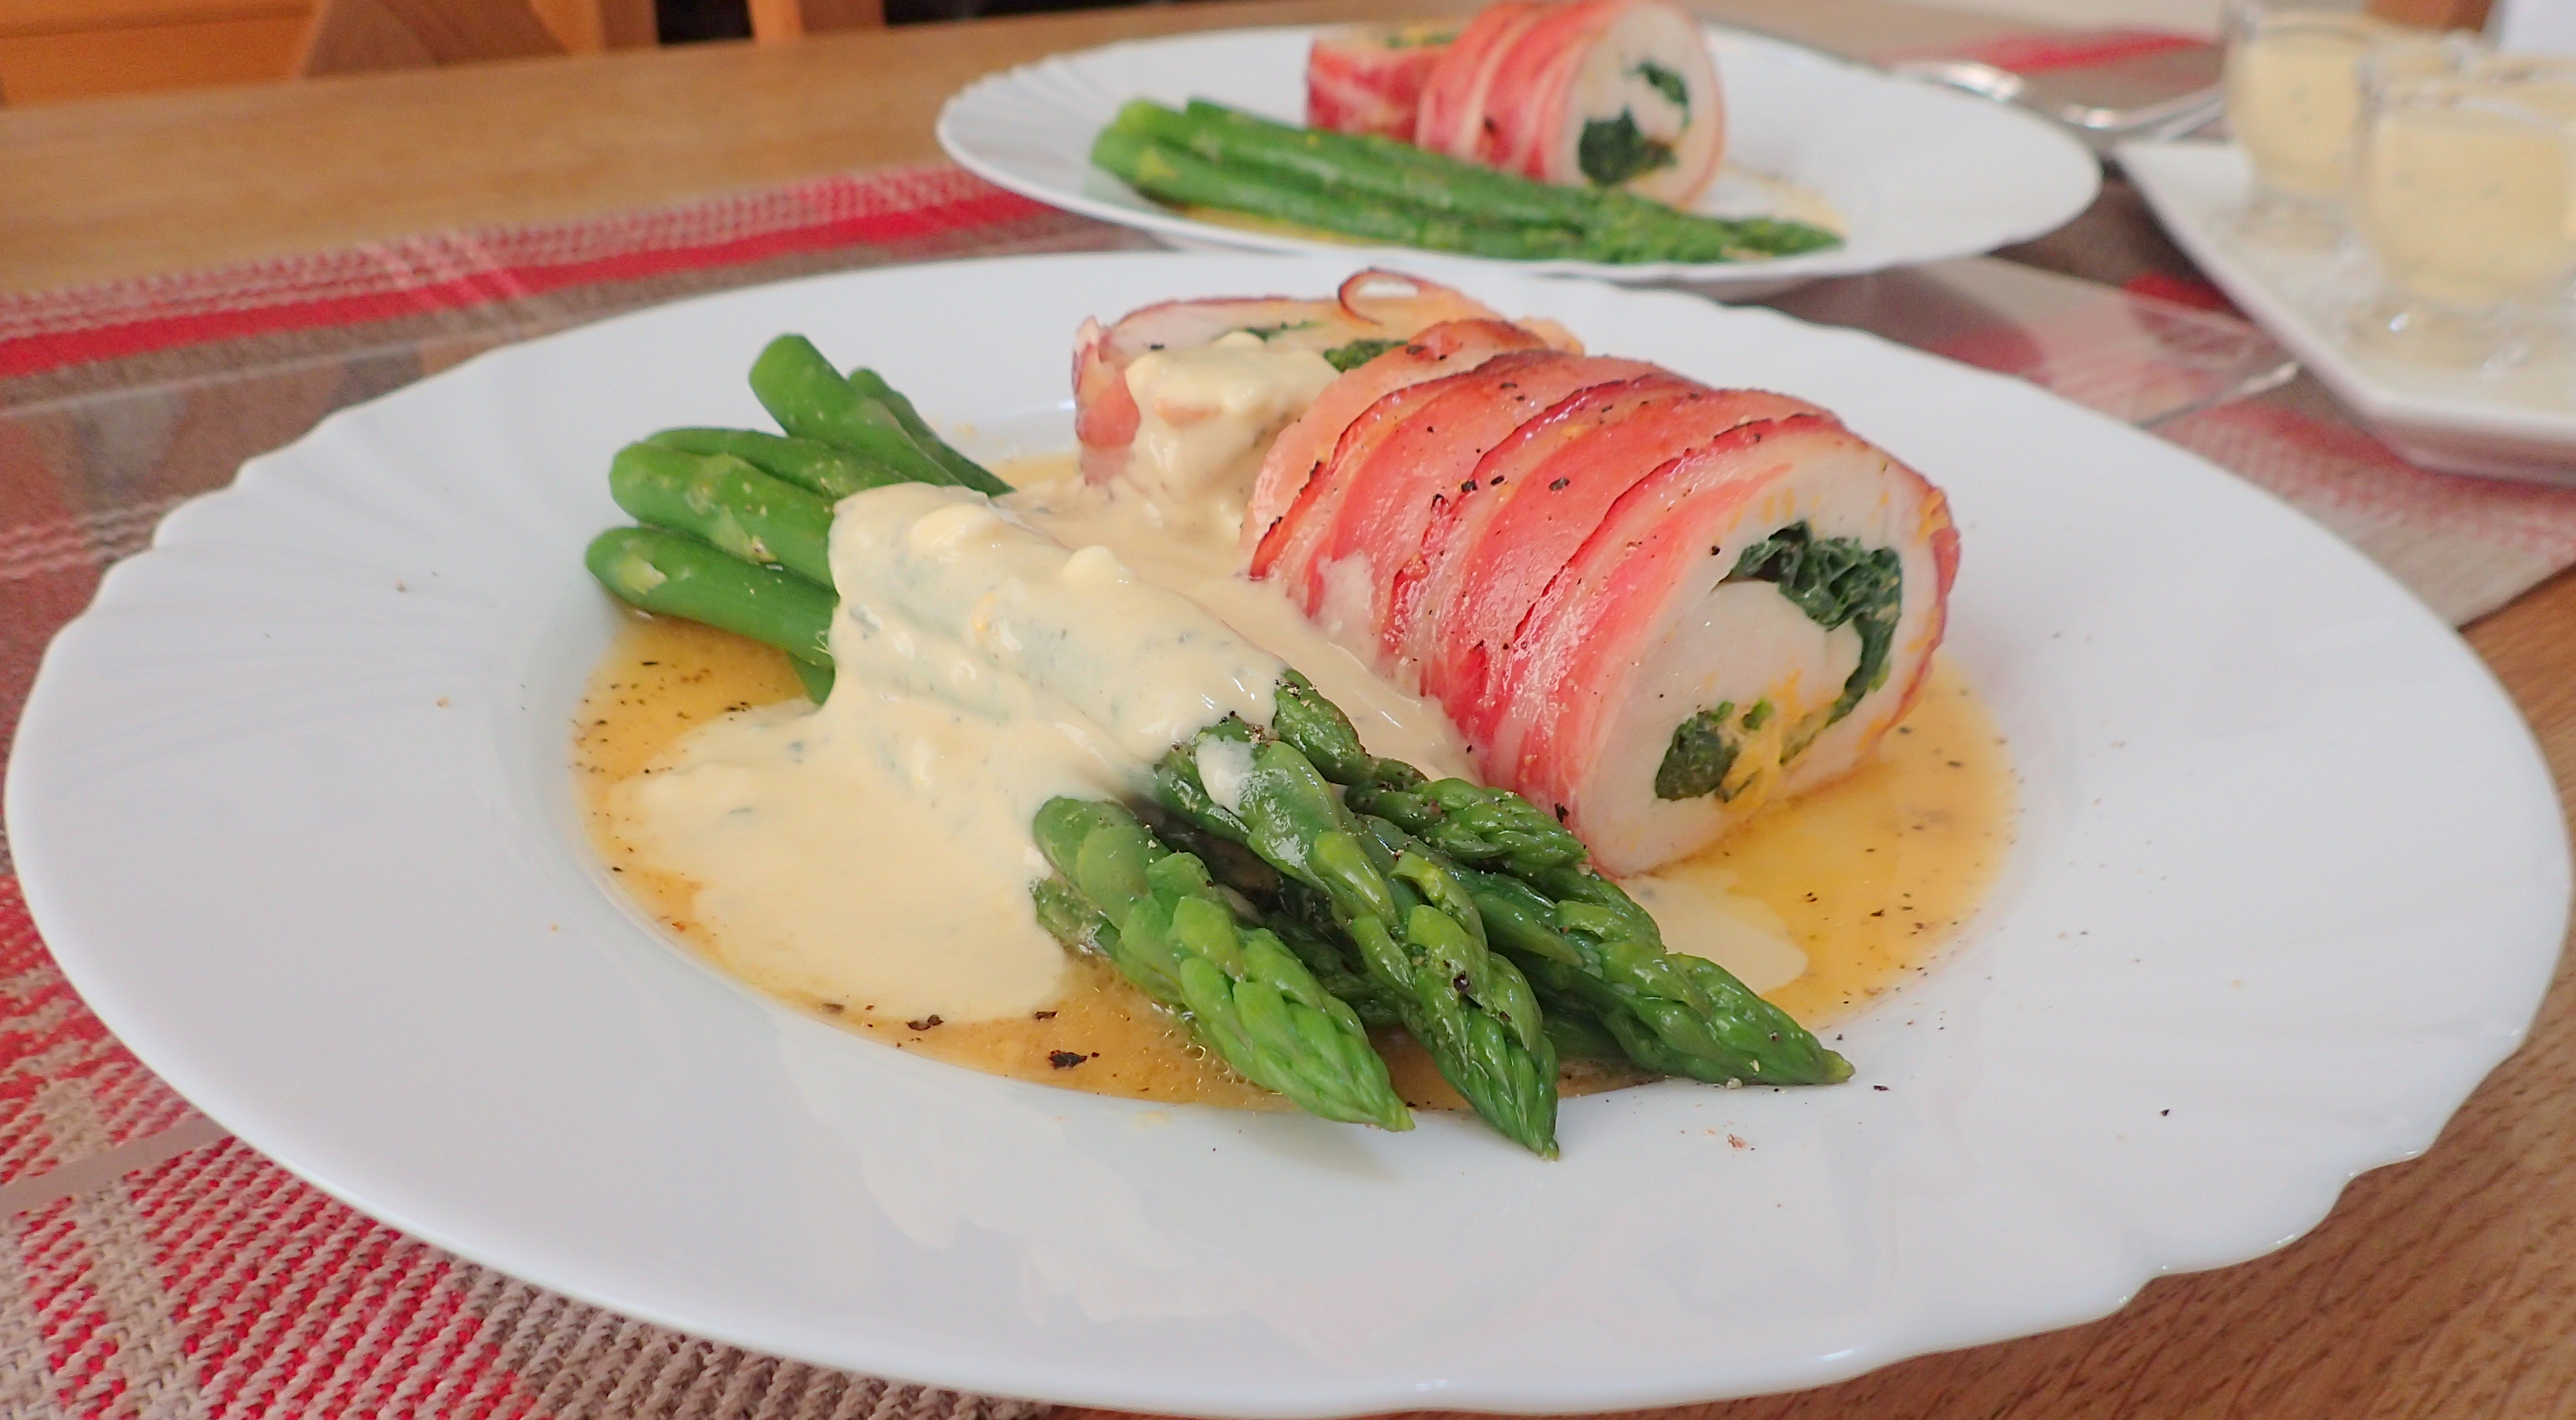 Chicken breast stuffed served with a blue cheese sauce